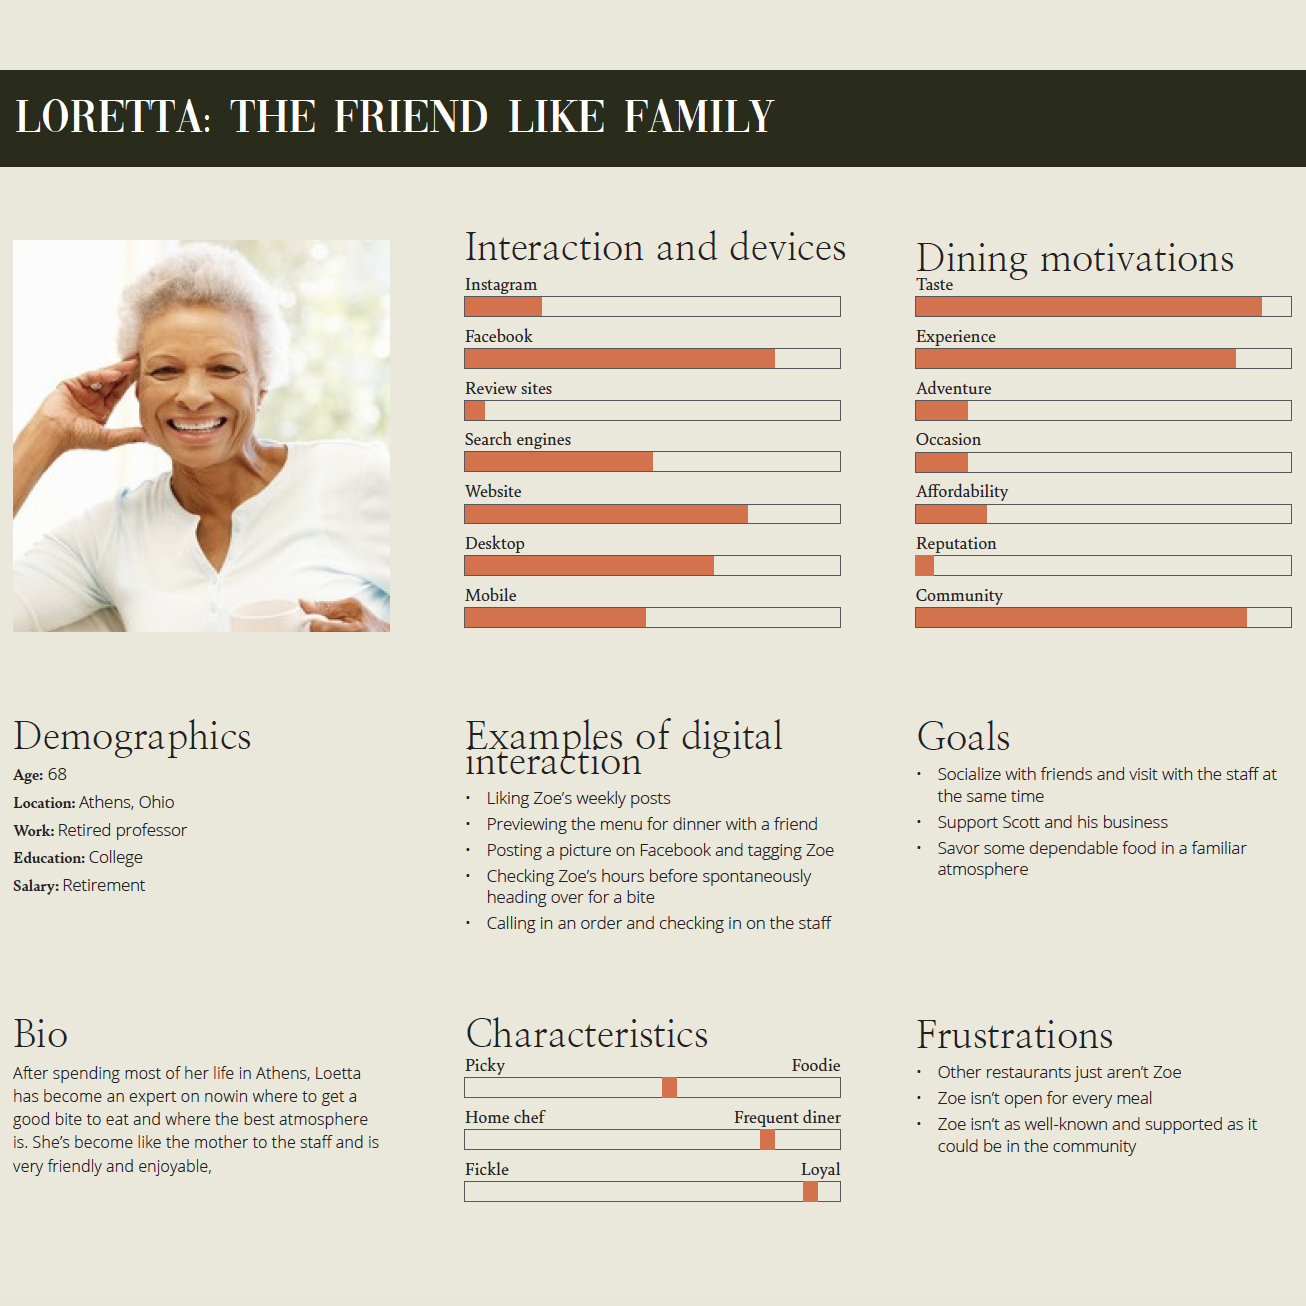 our friend like family persona used to inspire some of the design elements and help with research and planning